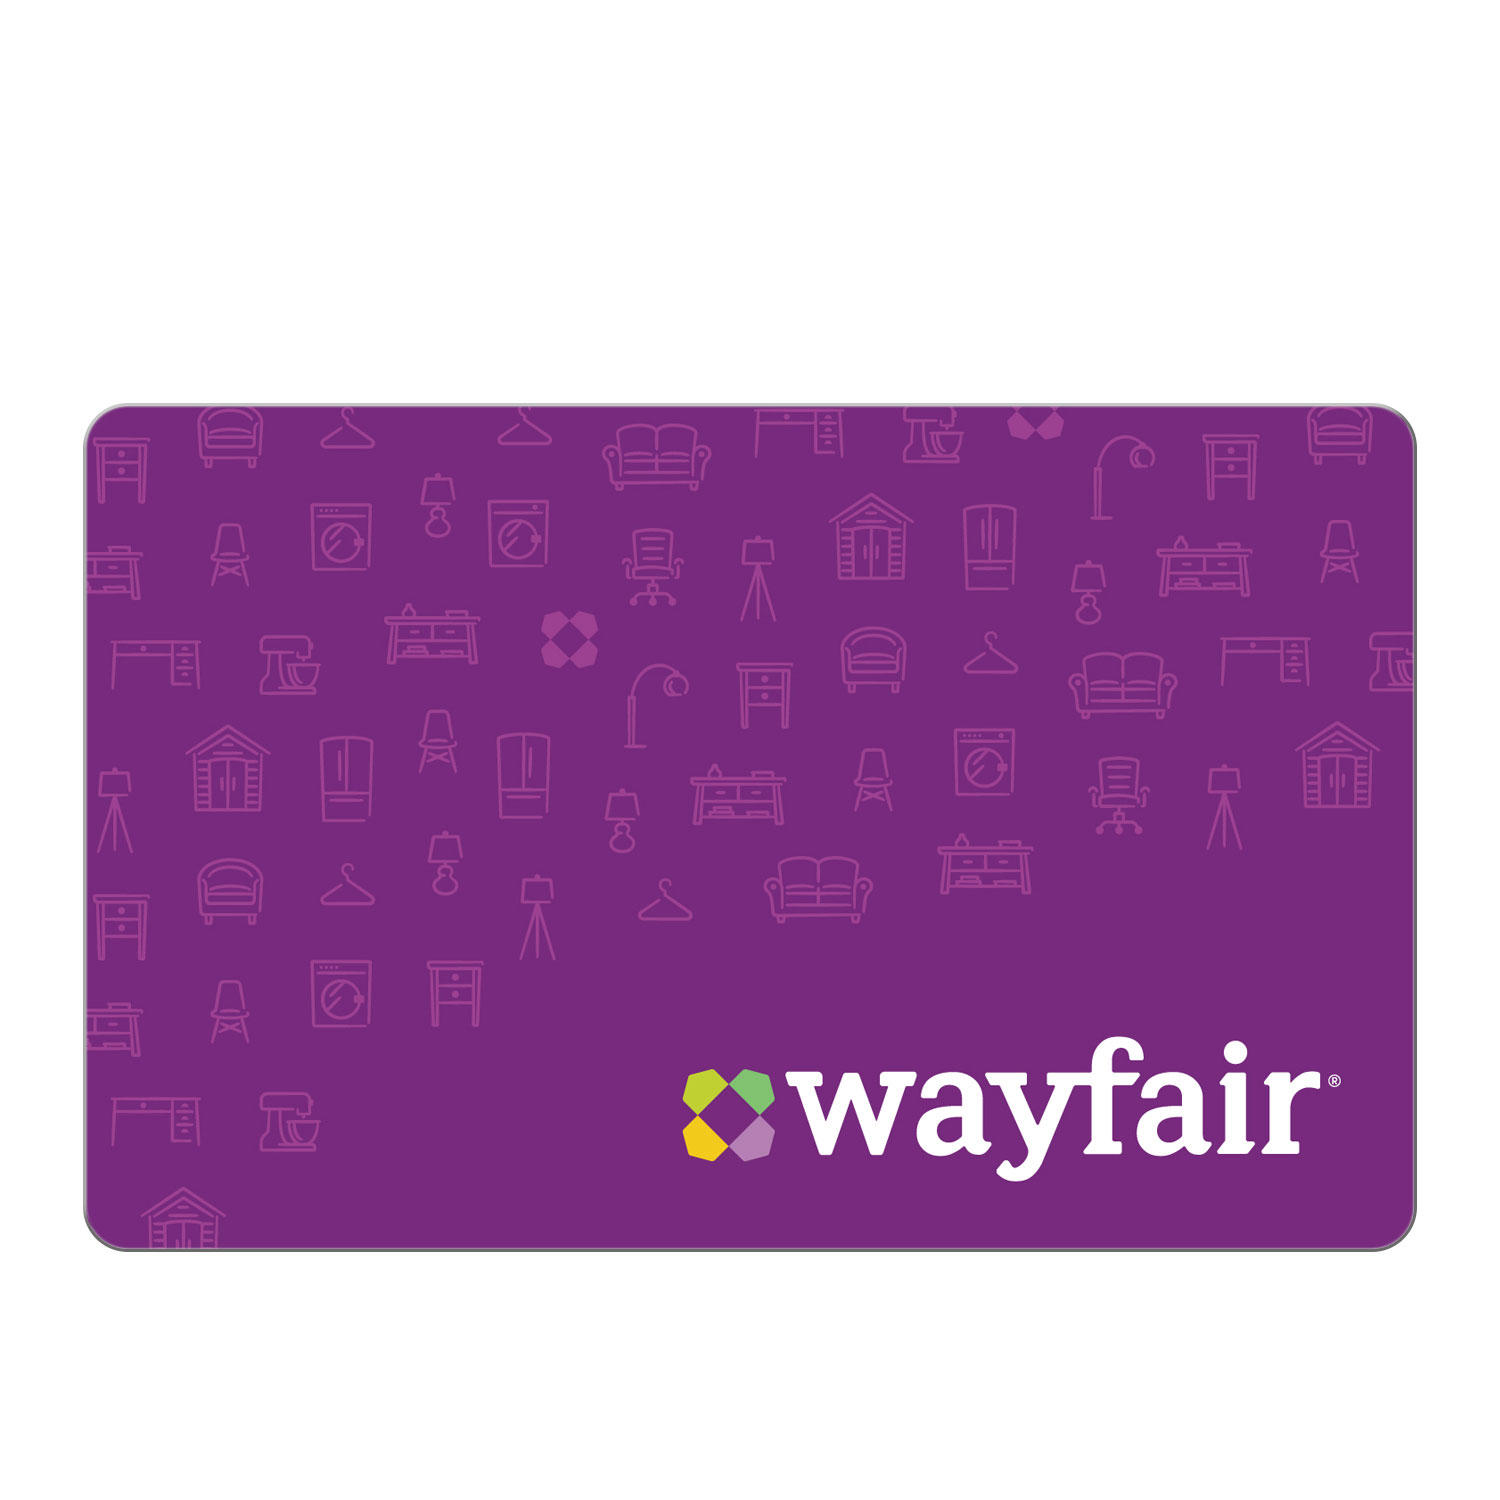 Wayfair $50 eGift Card (Email Delivery)